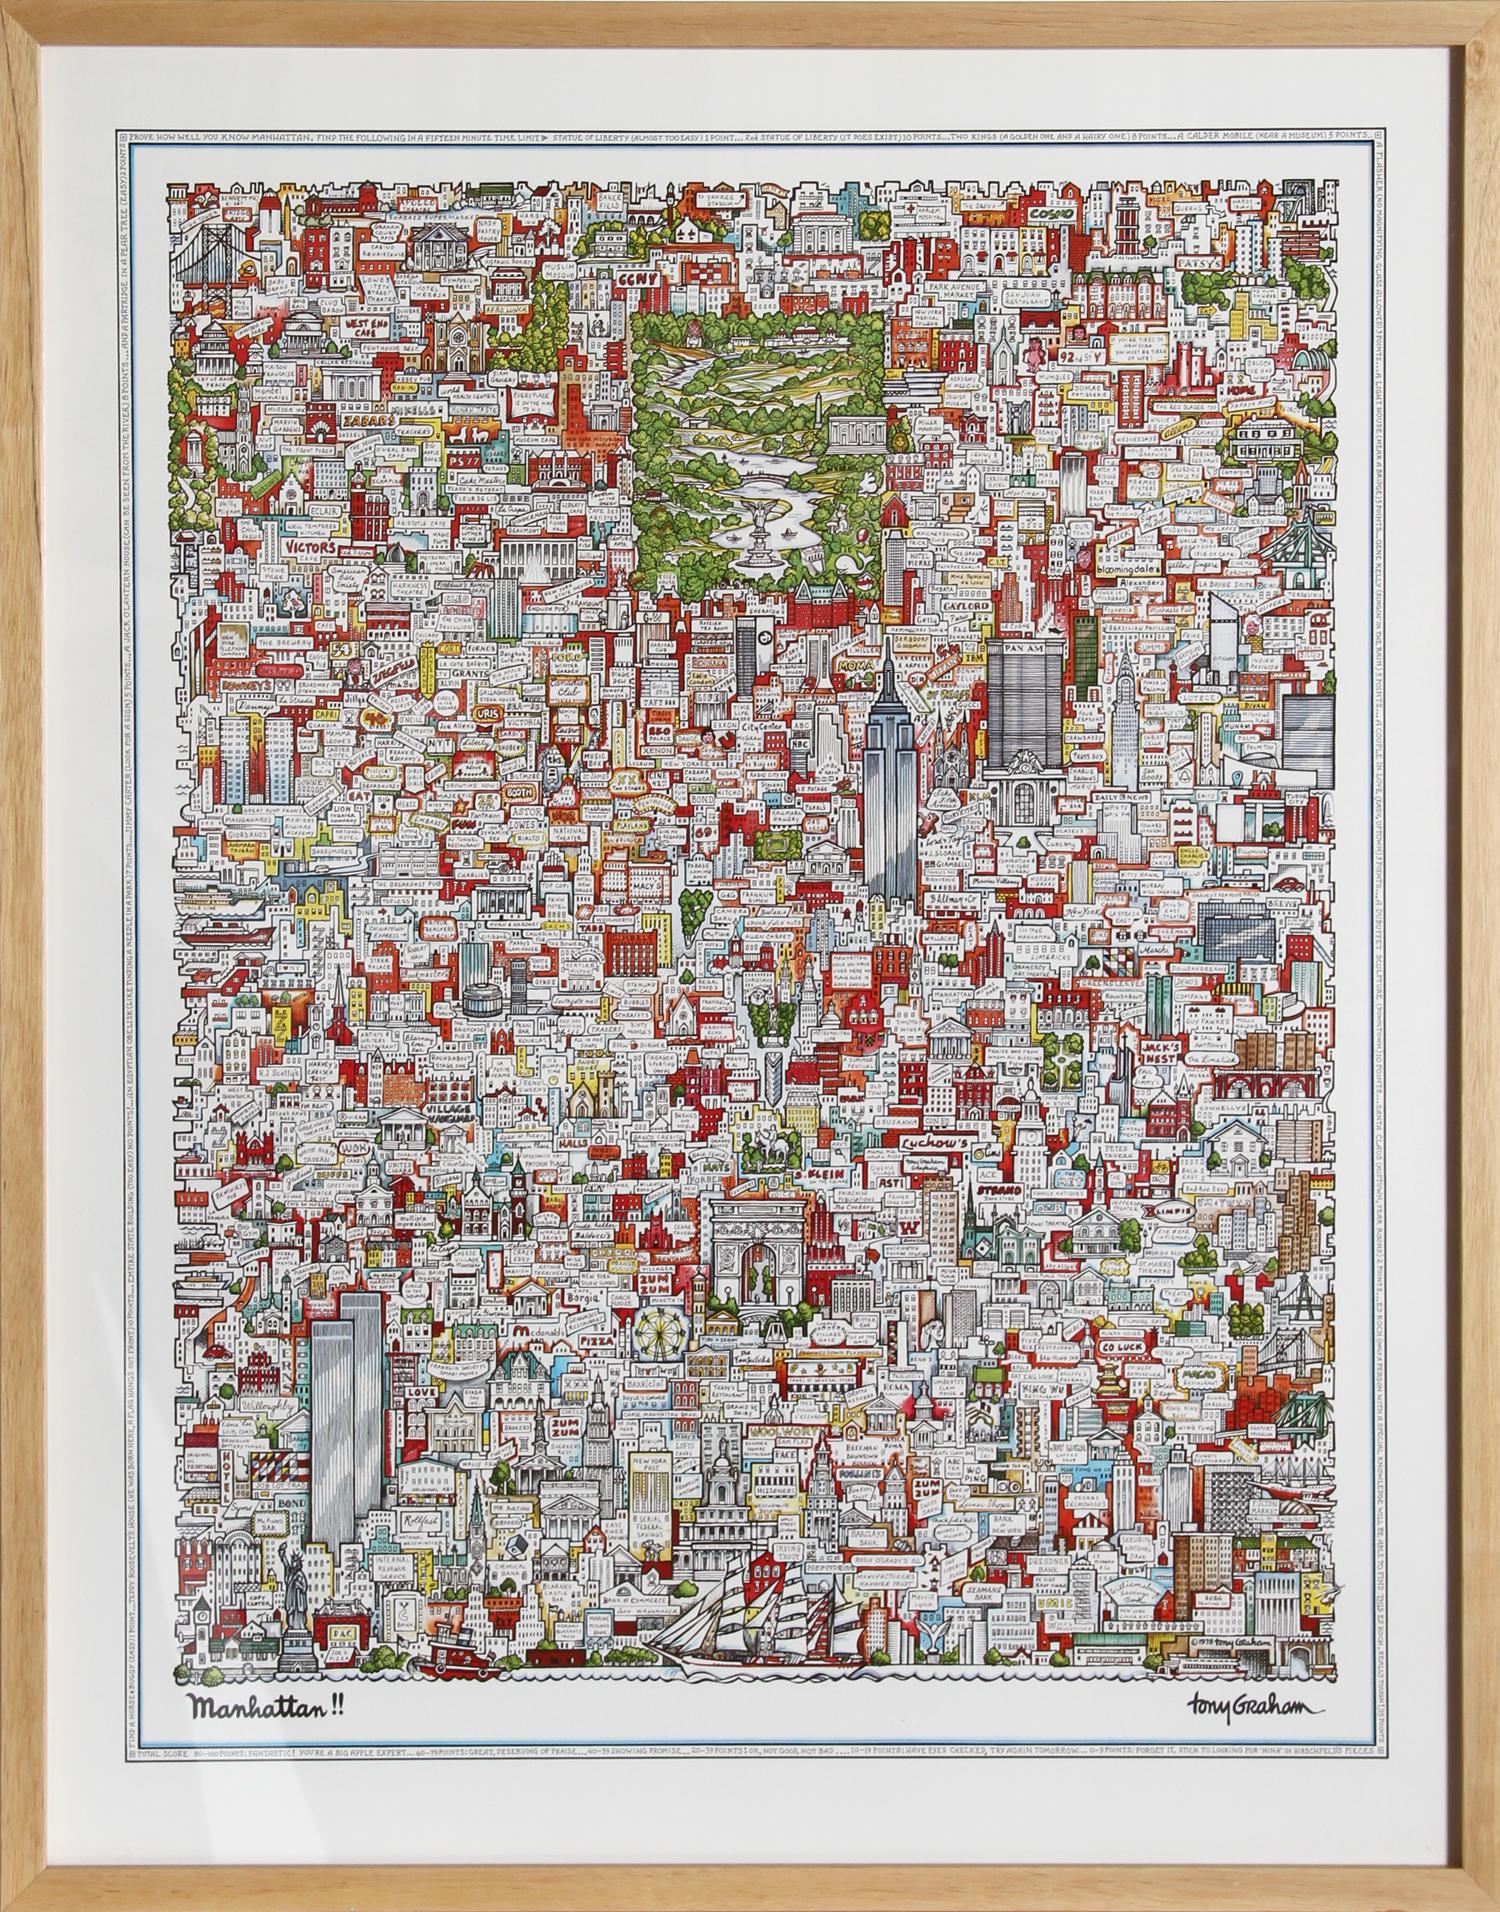 Tony Graham is a graphic artist known for his drawings and prints of New York City. “Manhattan” is the artist’s most iconic and collectible image published in 1978. Nicely framed.

Manhattan!! by Tony Graham, American (1933–1992)
Date: